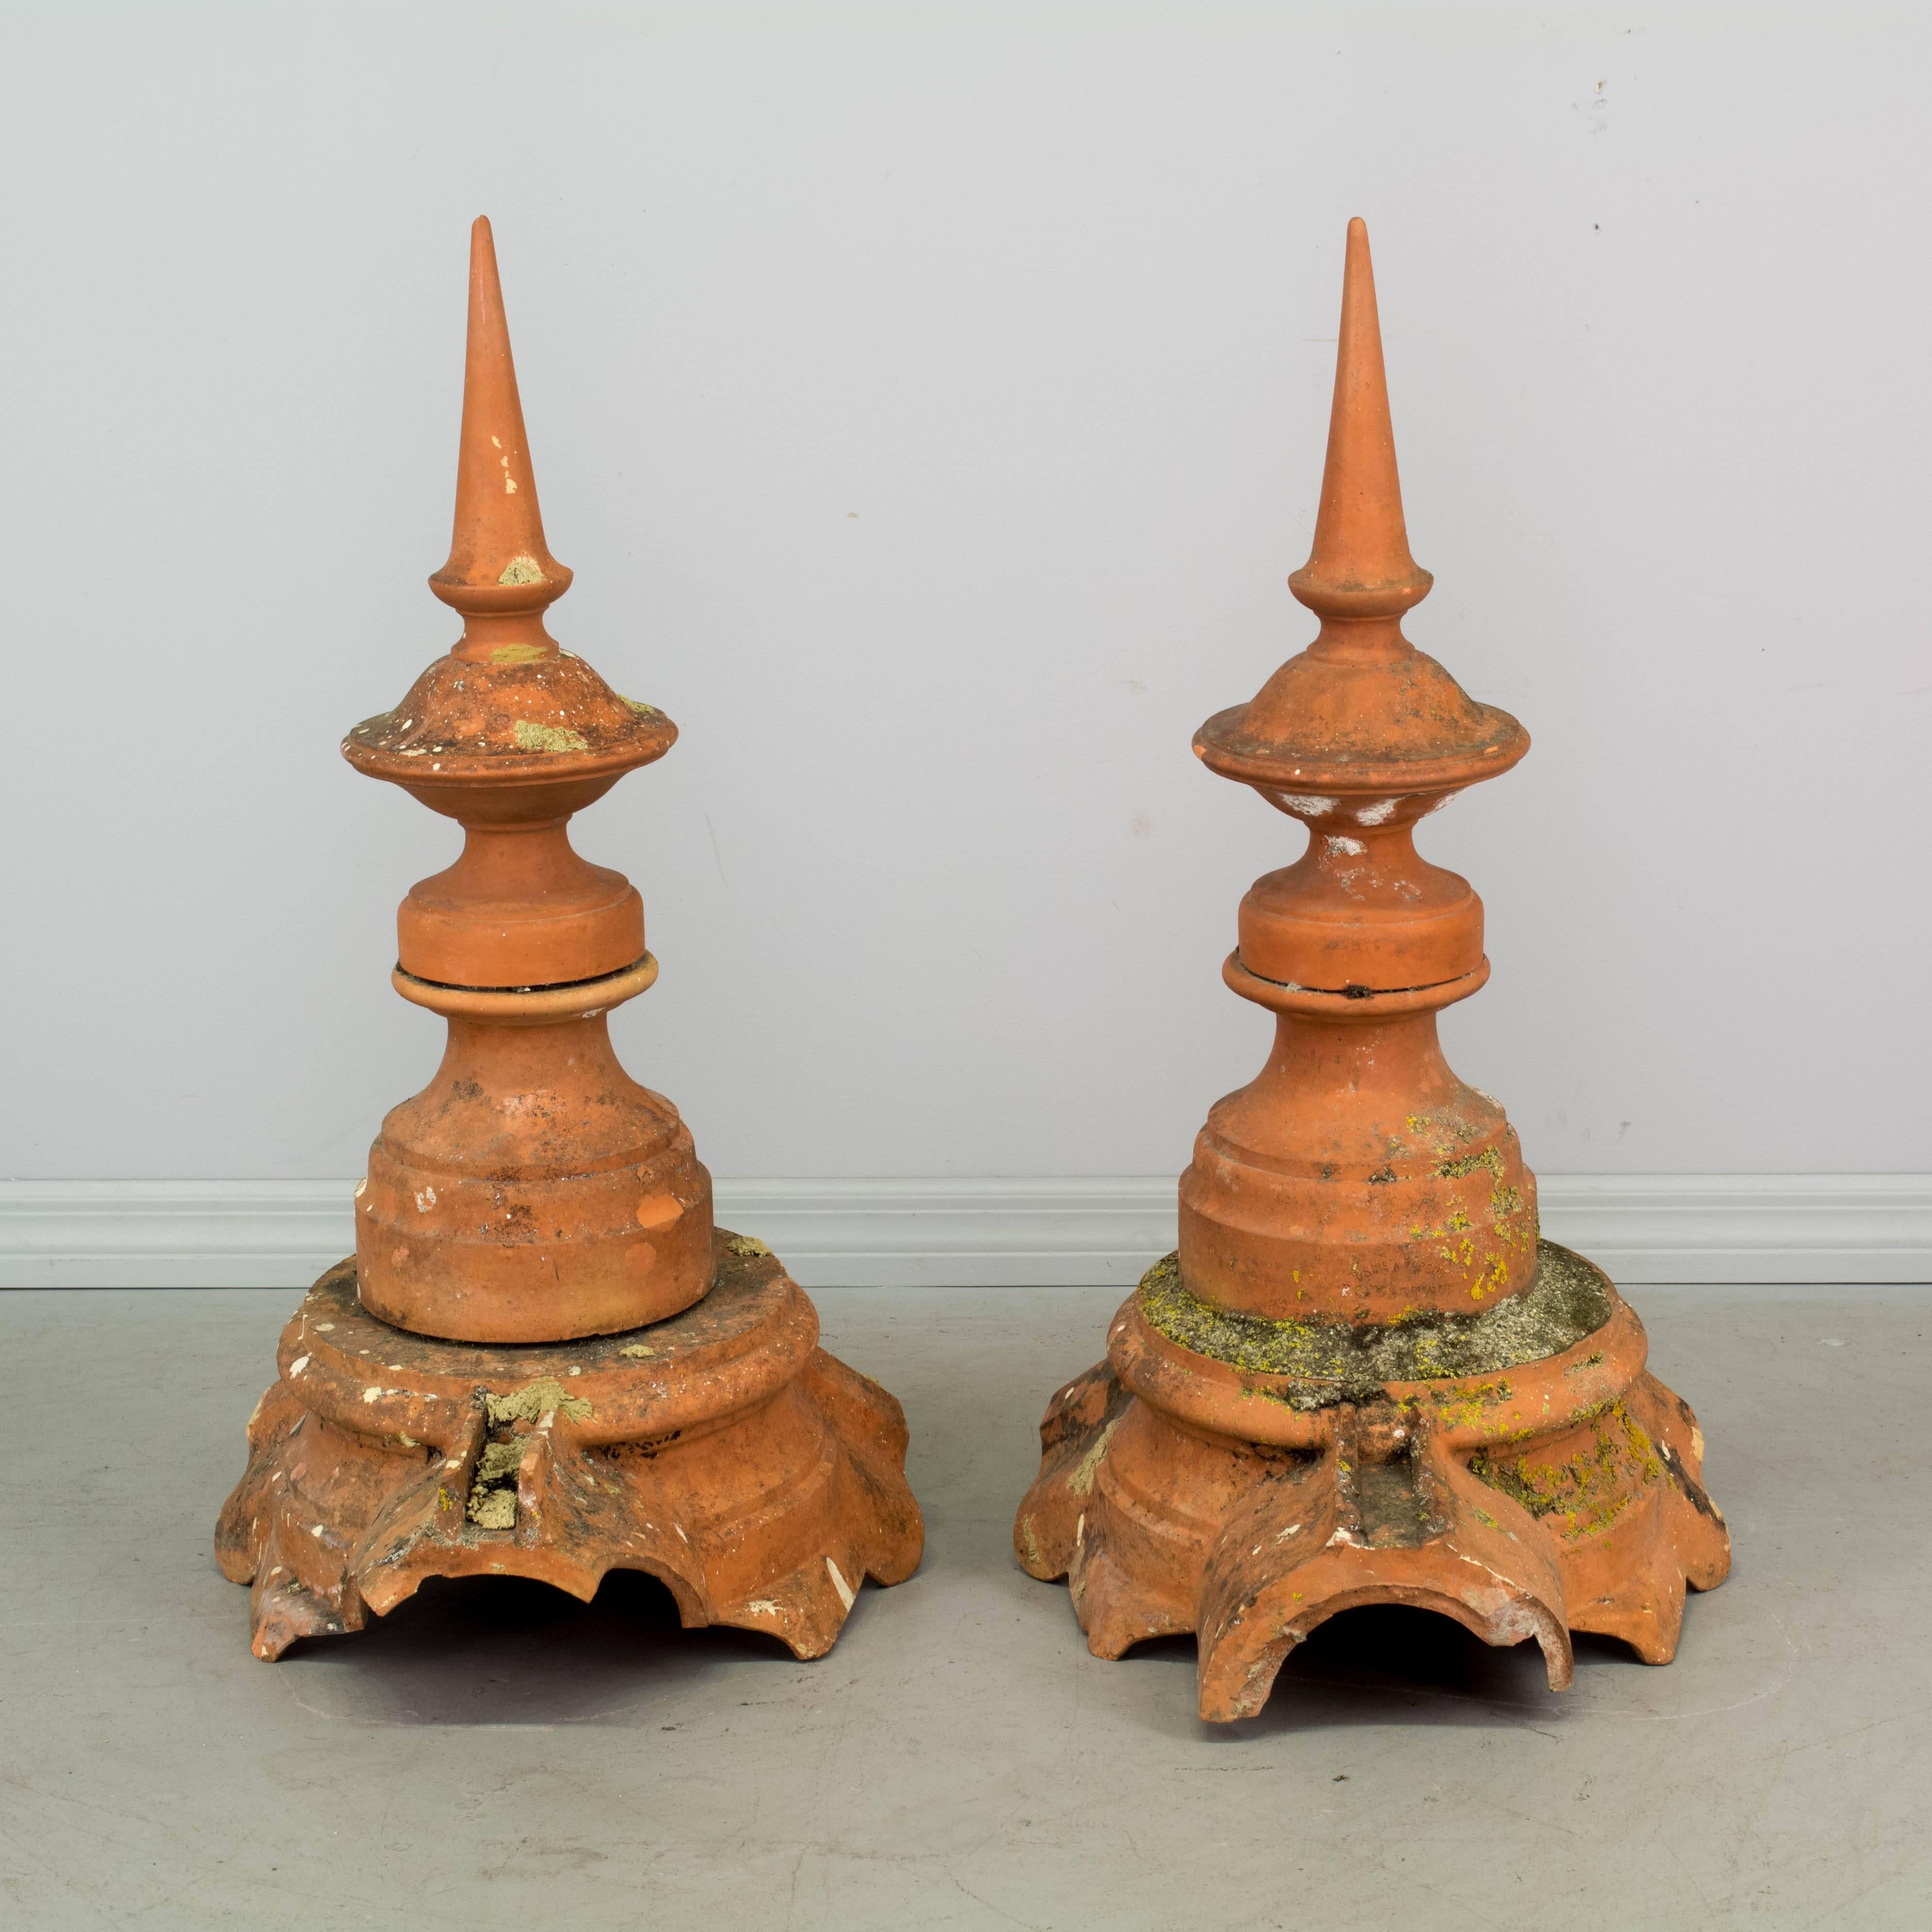 Pair of French terracotta architectural roof spires. In very good condition with nice old patina and remnants of moss. Excellent for use as sculptural elements in the garden.
More photos available upon request. We have a large selection of French